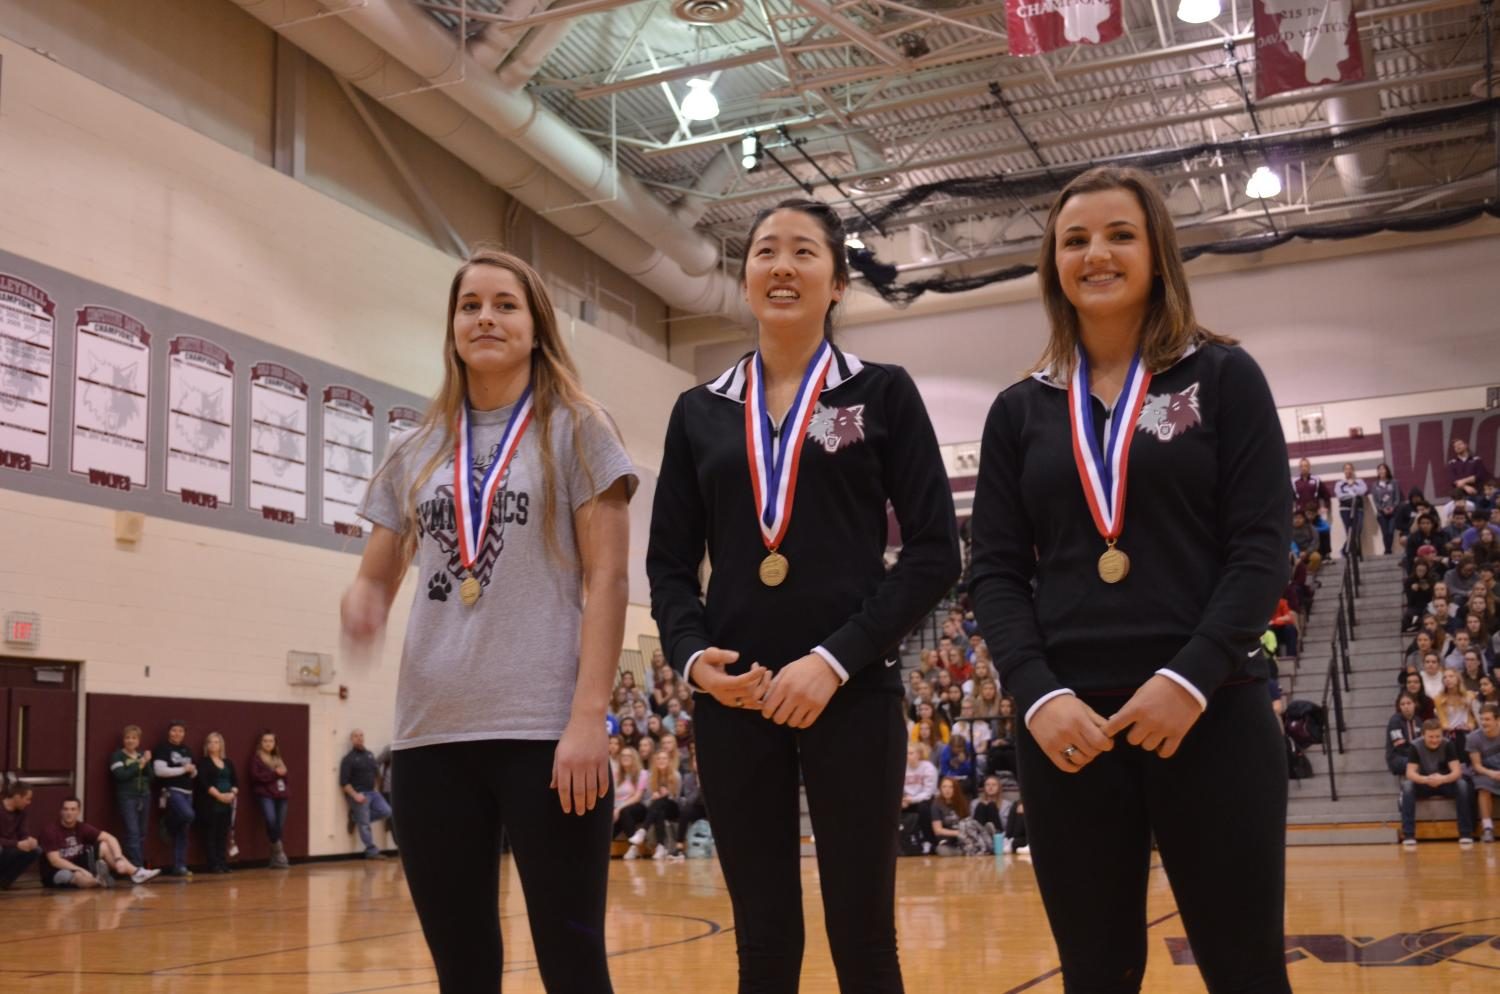 The+Girls+Gymnastics+Prairie+Ridge+Co-op+team+dominated+this+year+with+regional%2C+sectional%2C+and+now+a+second+state+championship.+Pictured+here+are+gymnasts+Erinn+Placko%2C+Maddi+Kim%2C+and+%0AKira+Karlblom.